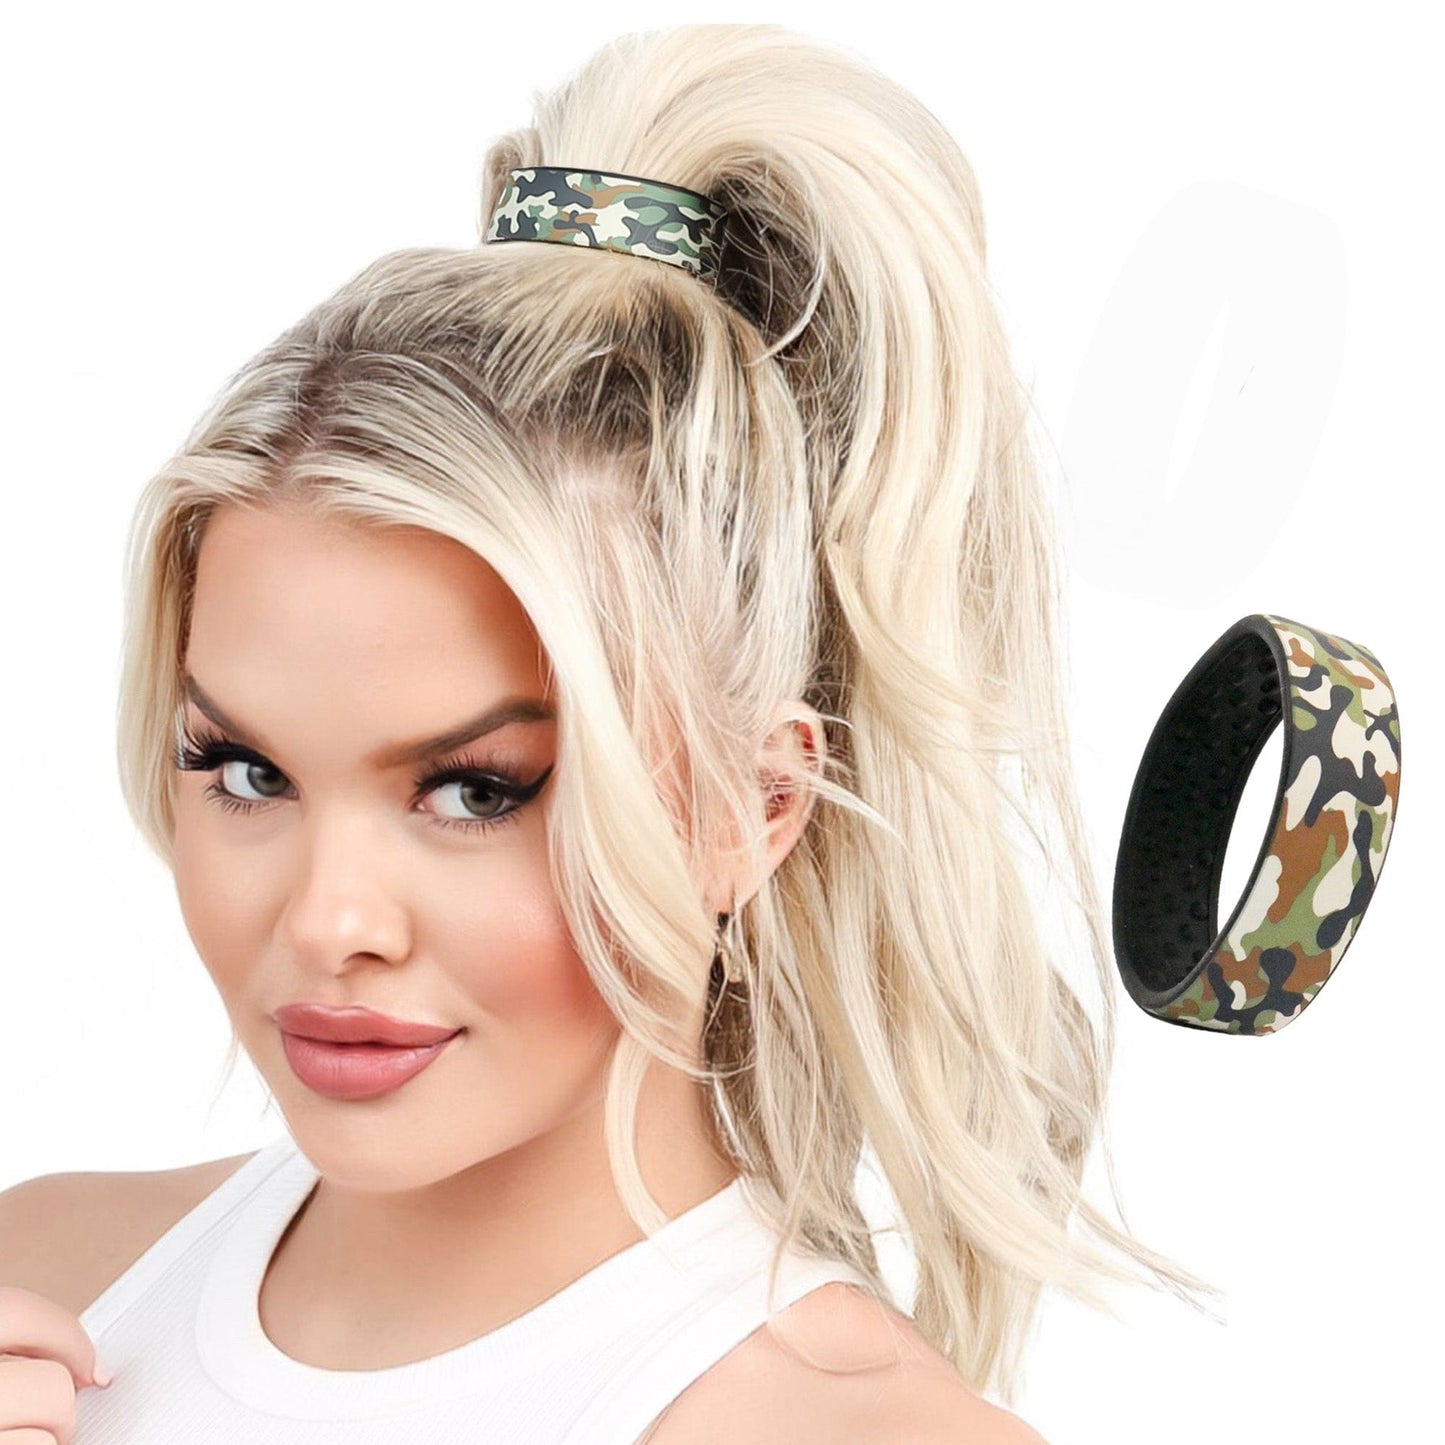 Camo Limited Edition Designer PONY-O. This larger size is perfect for ponytails and all-up styles.